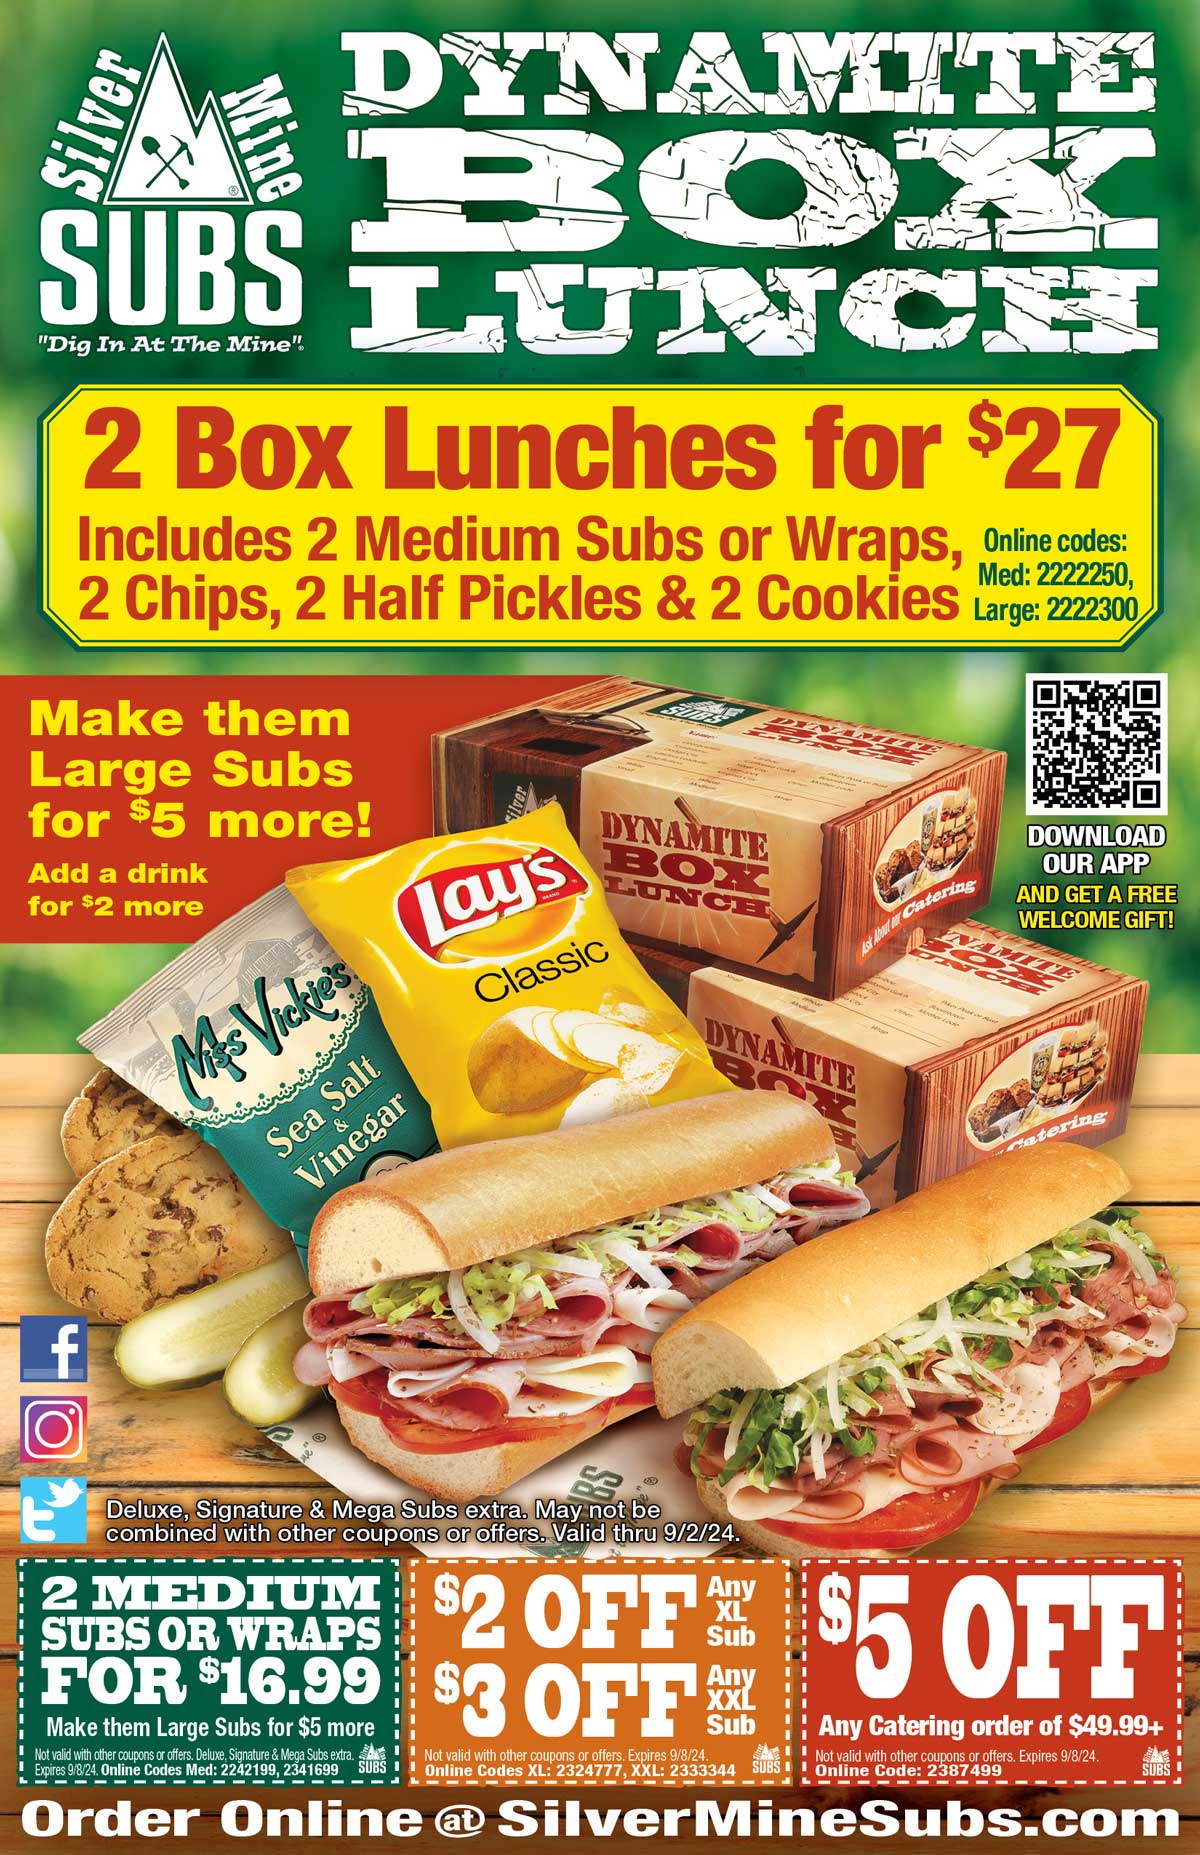 Dig in to a Dynamite Box Lunch